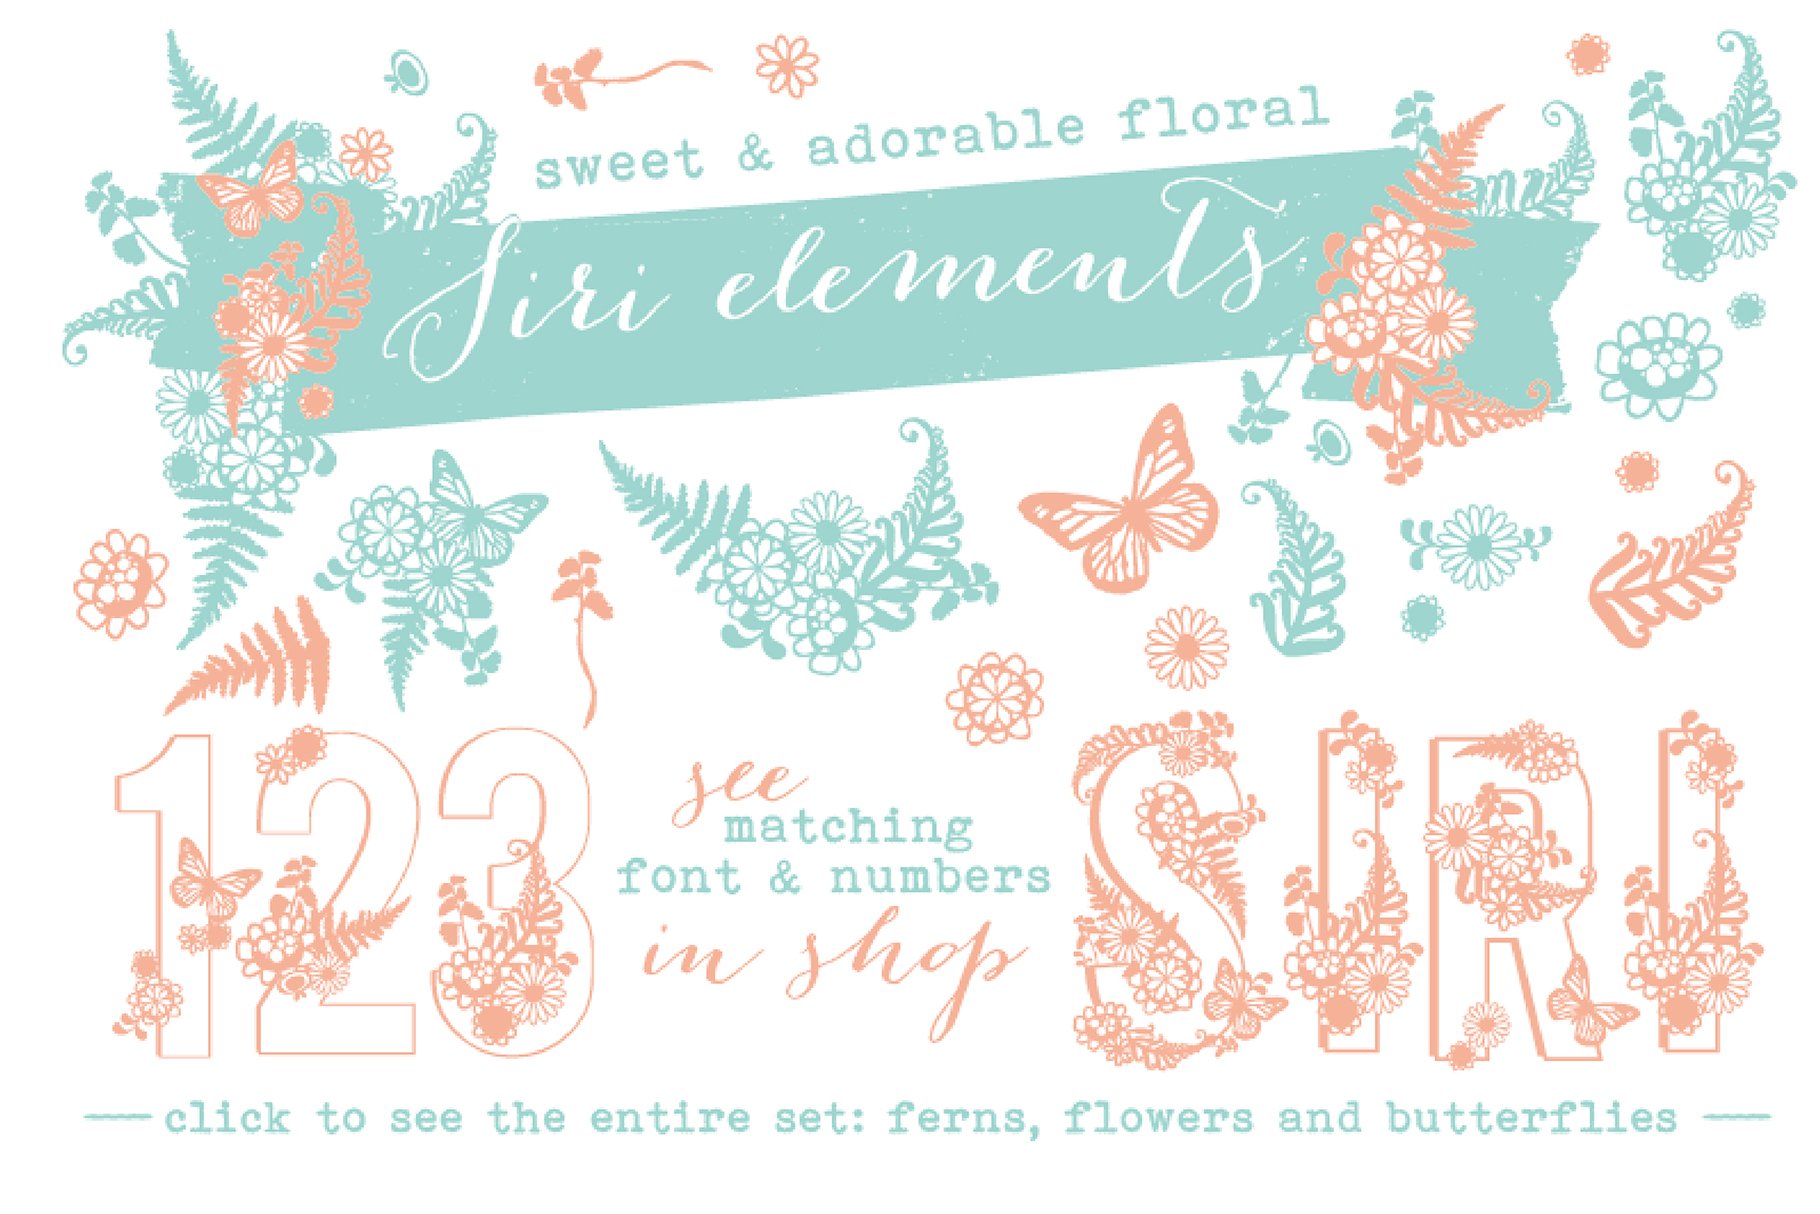 Siri Floral Elements Font cover image.